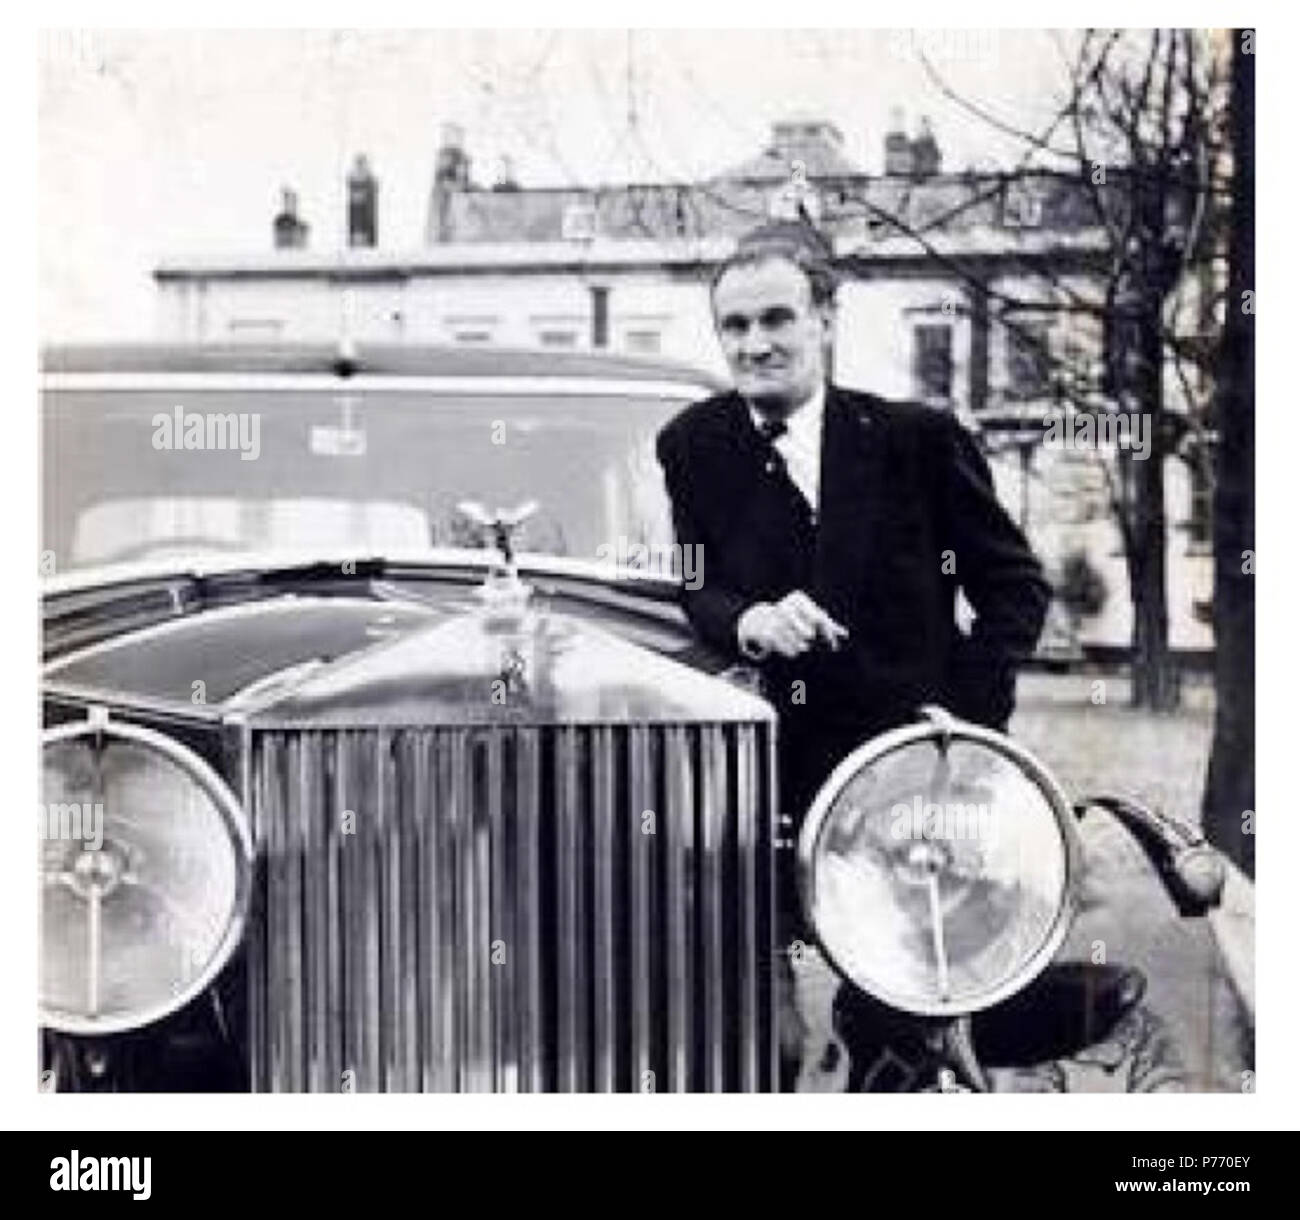 English: Edward Arnold (Eddie) Chapman 1914-1997; gangster and WW2 double agent pictured aside his Rolls Royce. 6 February 2013, 11:58:17 1 Eddie Chapman with car Stock Photo